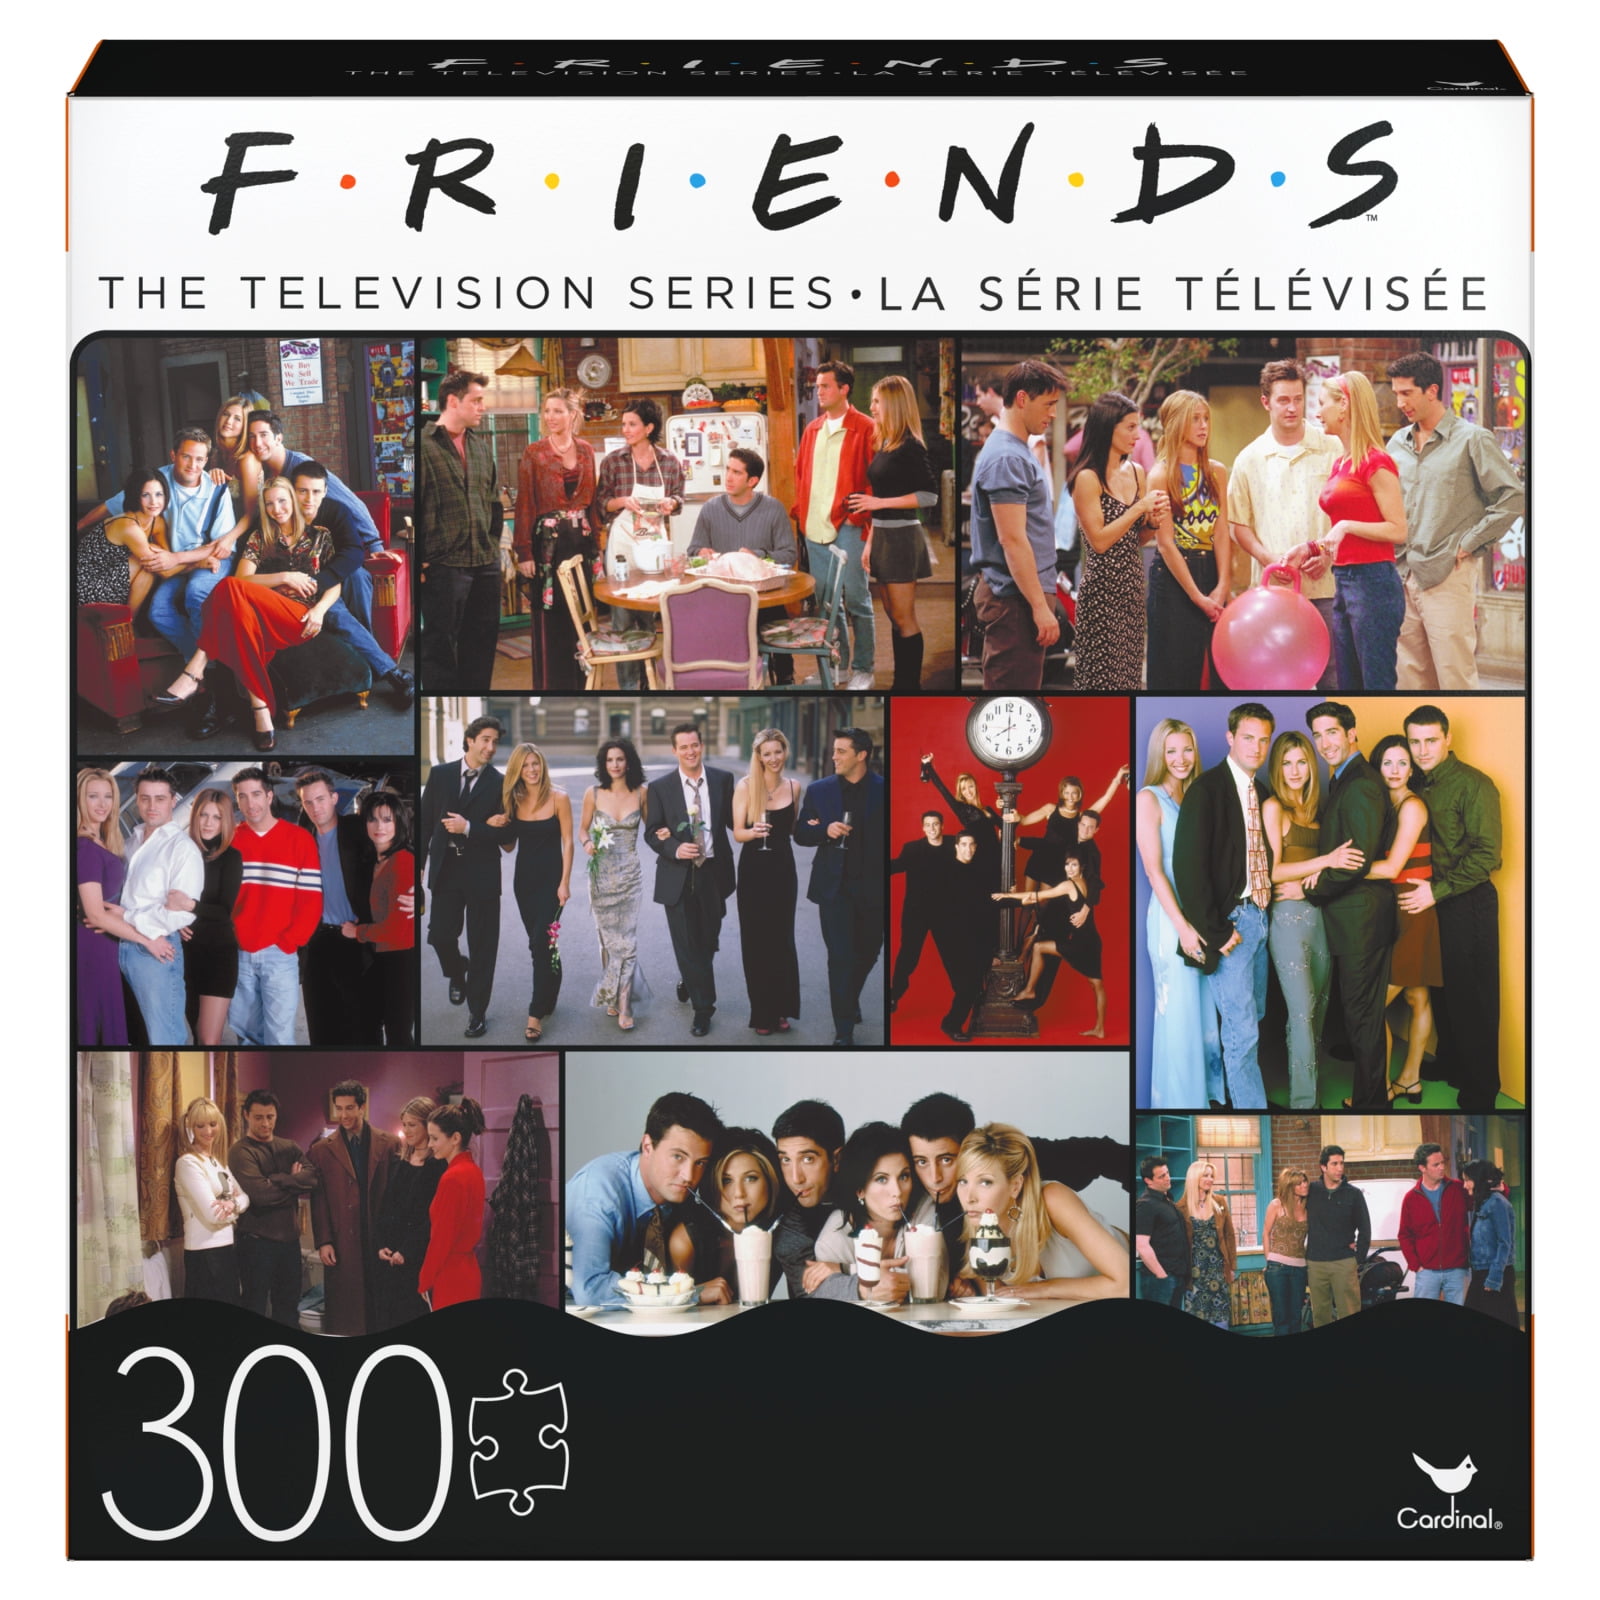 Preowned for sale online Friends TV Show Collage Puzzle 1000 Pieces 